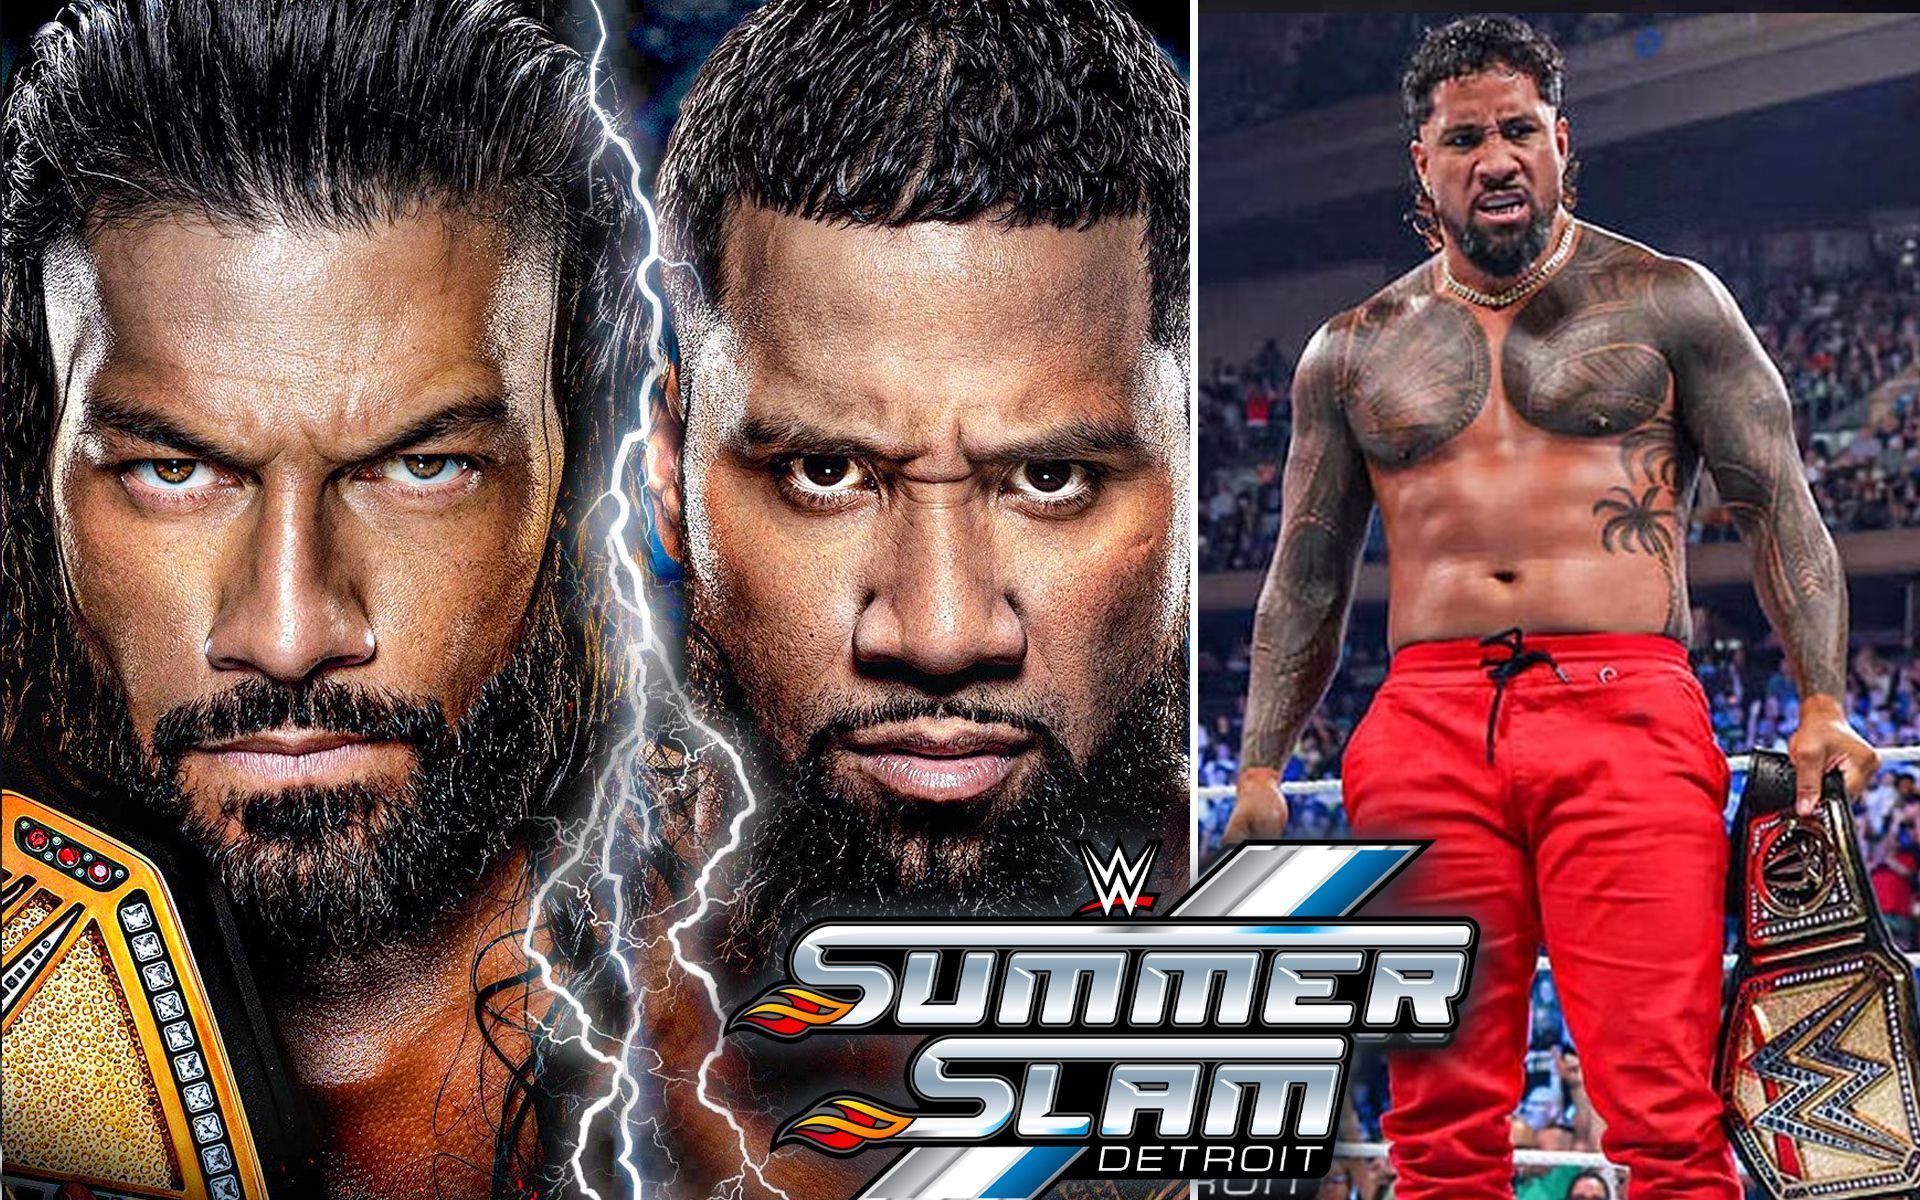 Roman Reigns will face Jey Uso in a Tribal Comat match at SummerSlam 2023